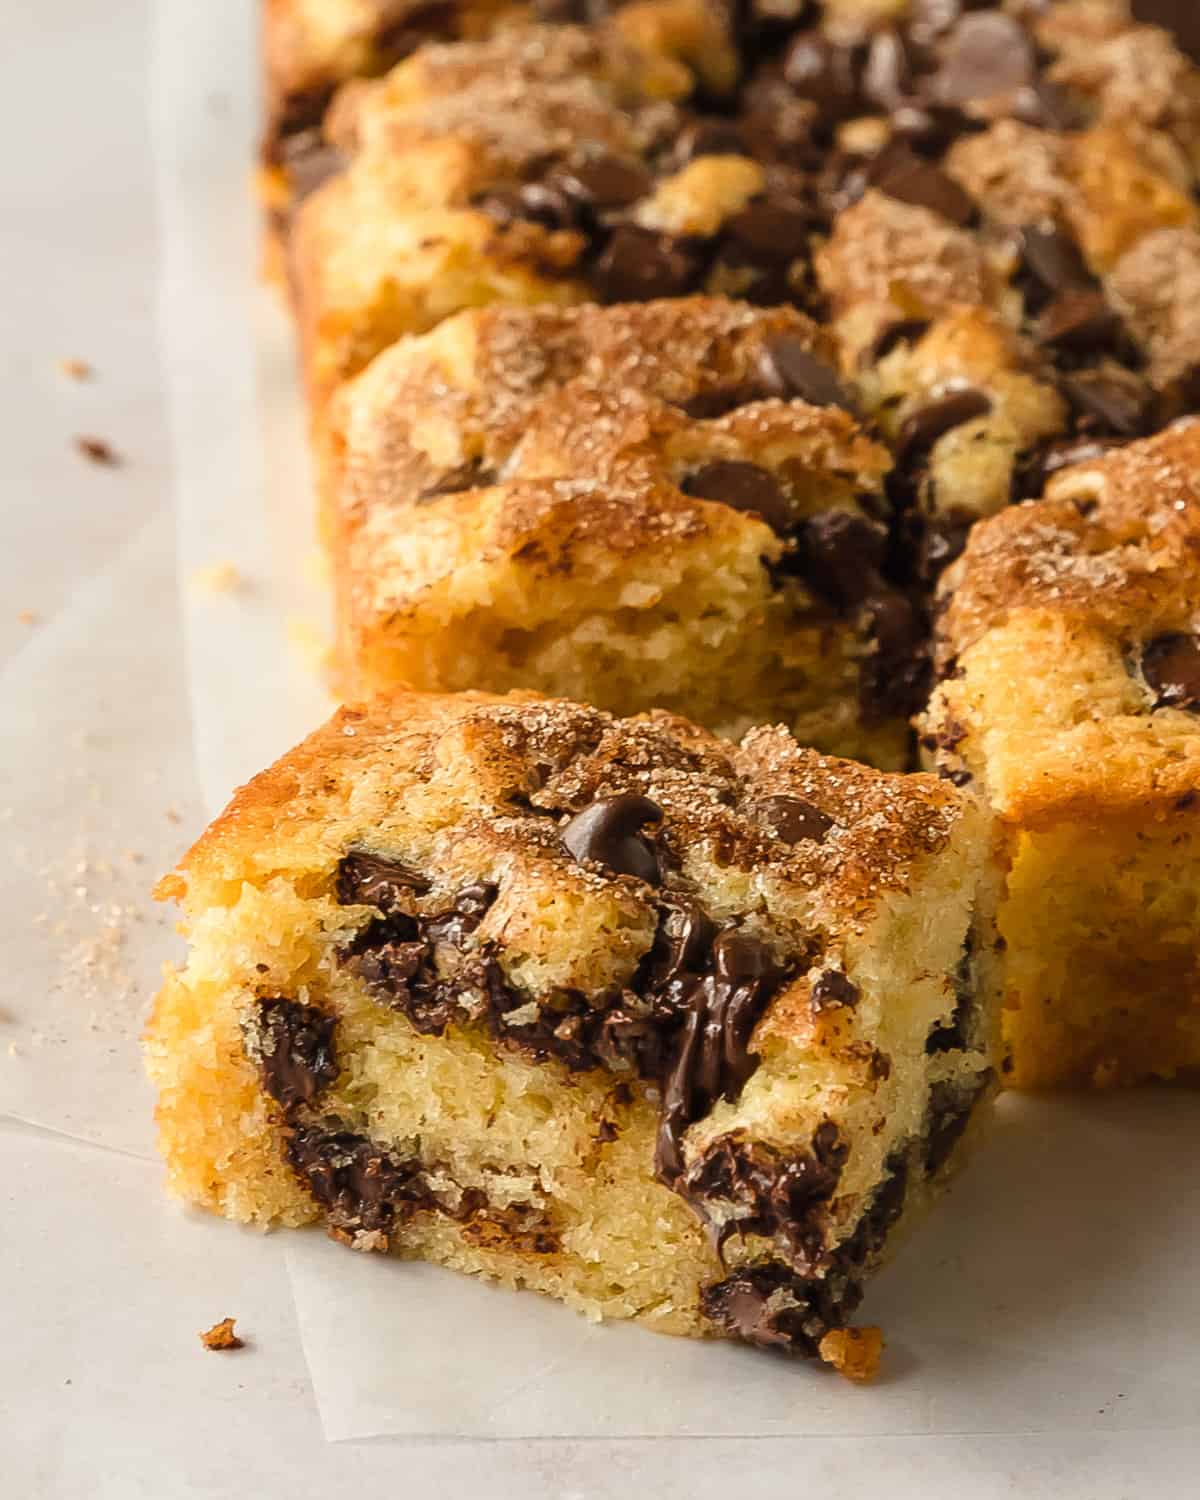 Chocolate chip cake is a soft, moist and fluffy vanilla cake layered with sweet chocolate chips and cinnamon sugar. This chocolate chip cake recipe is super easy to make in one bowl and is the perfect simple but decadent cake for any occasion.